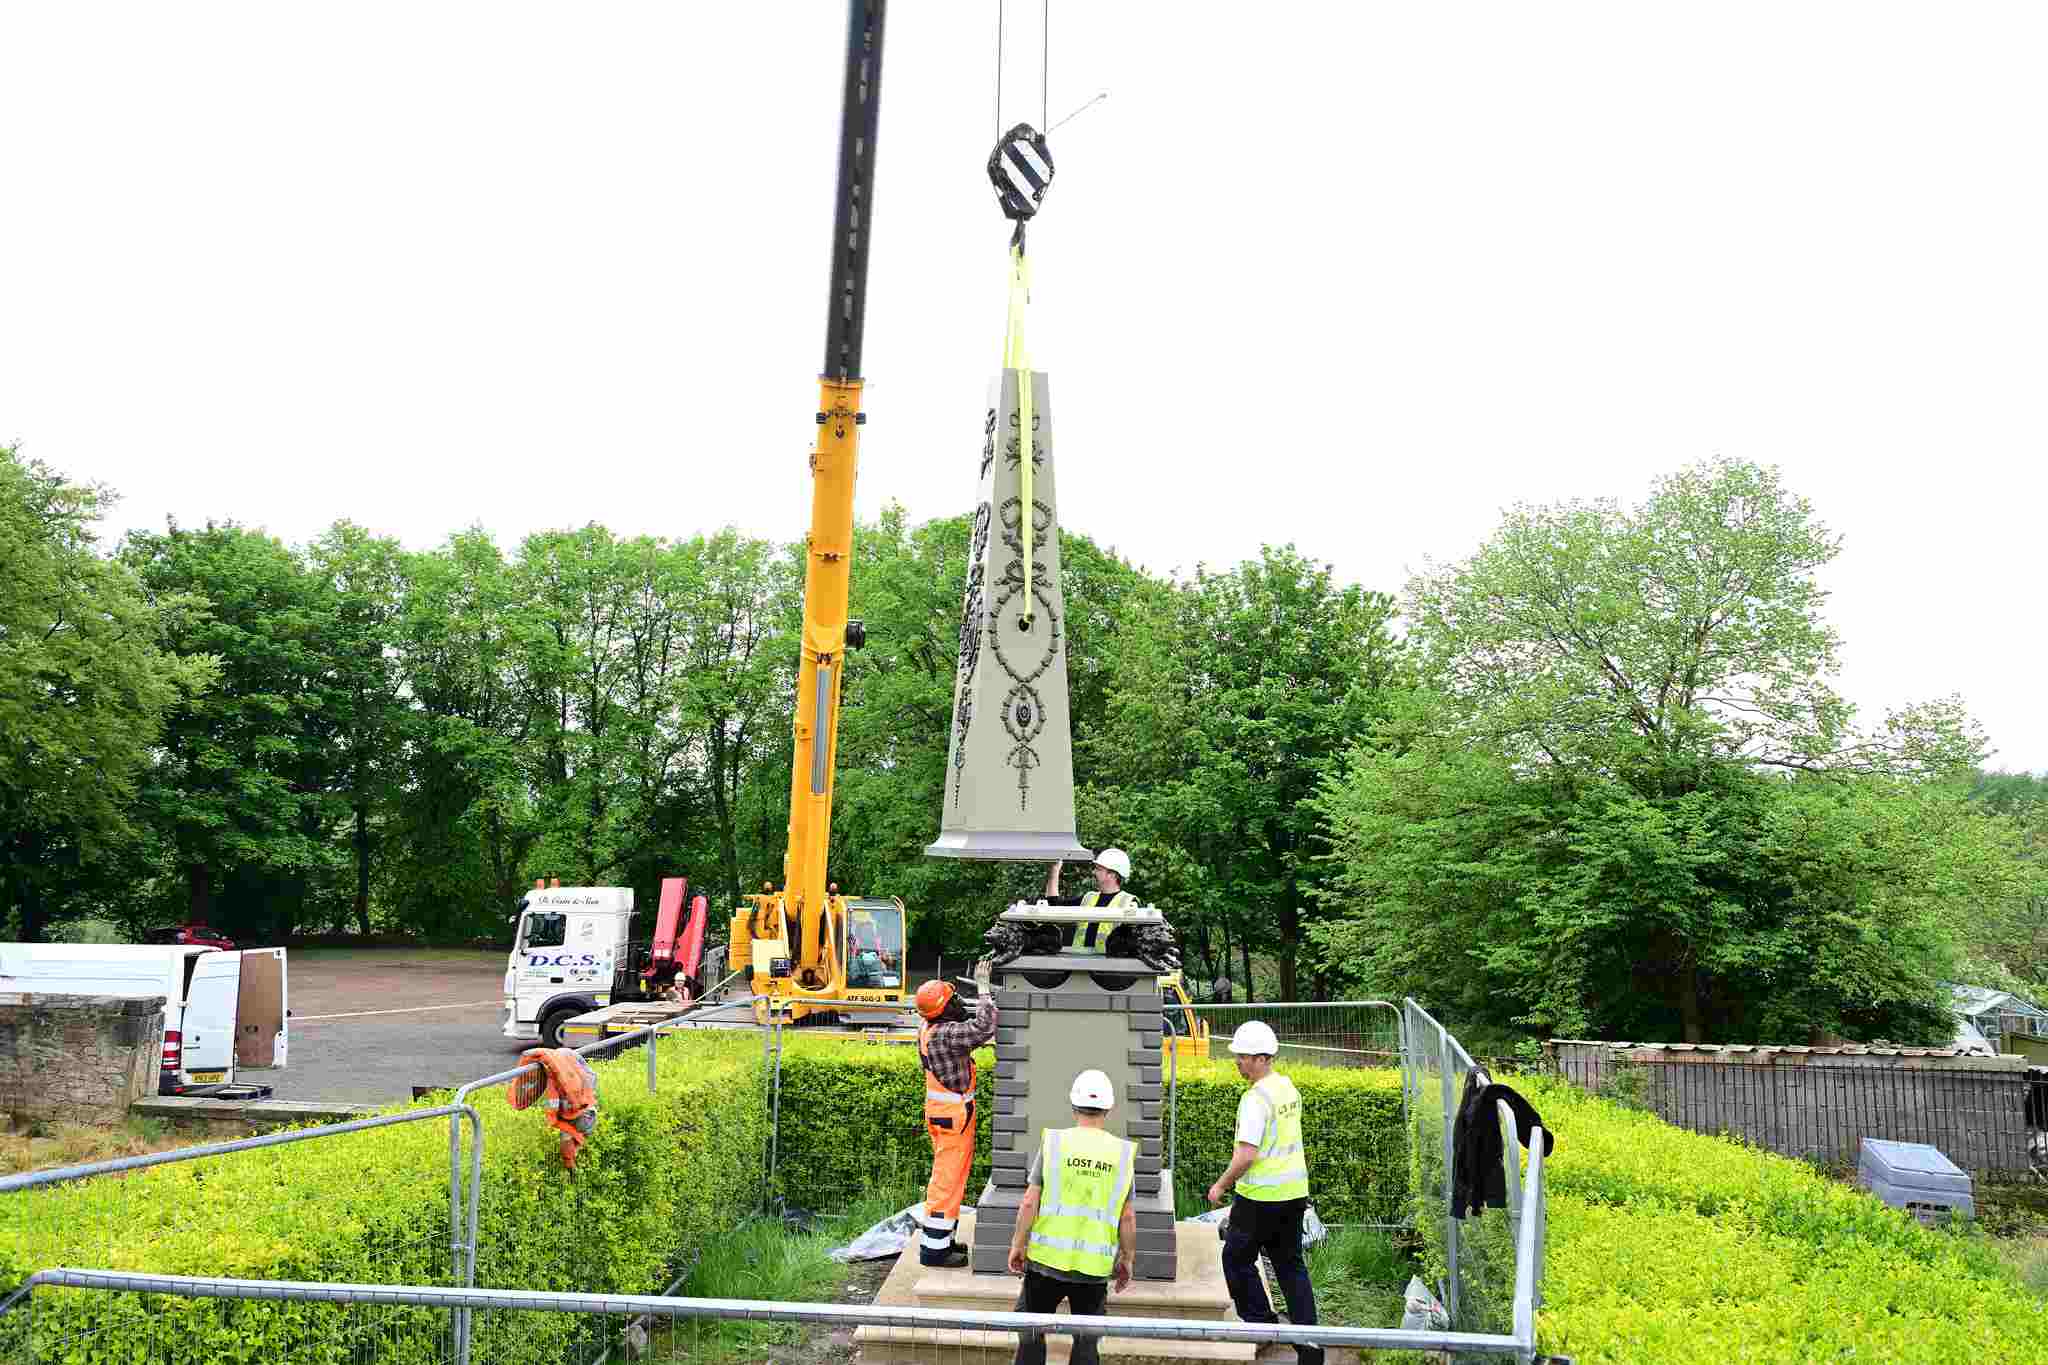 Obelisk being lowered into position